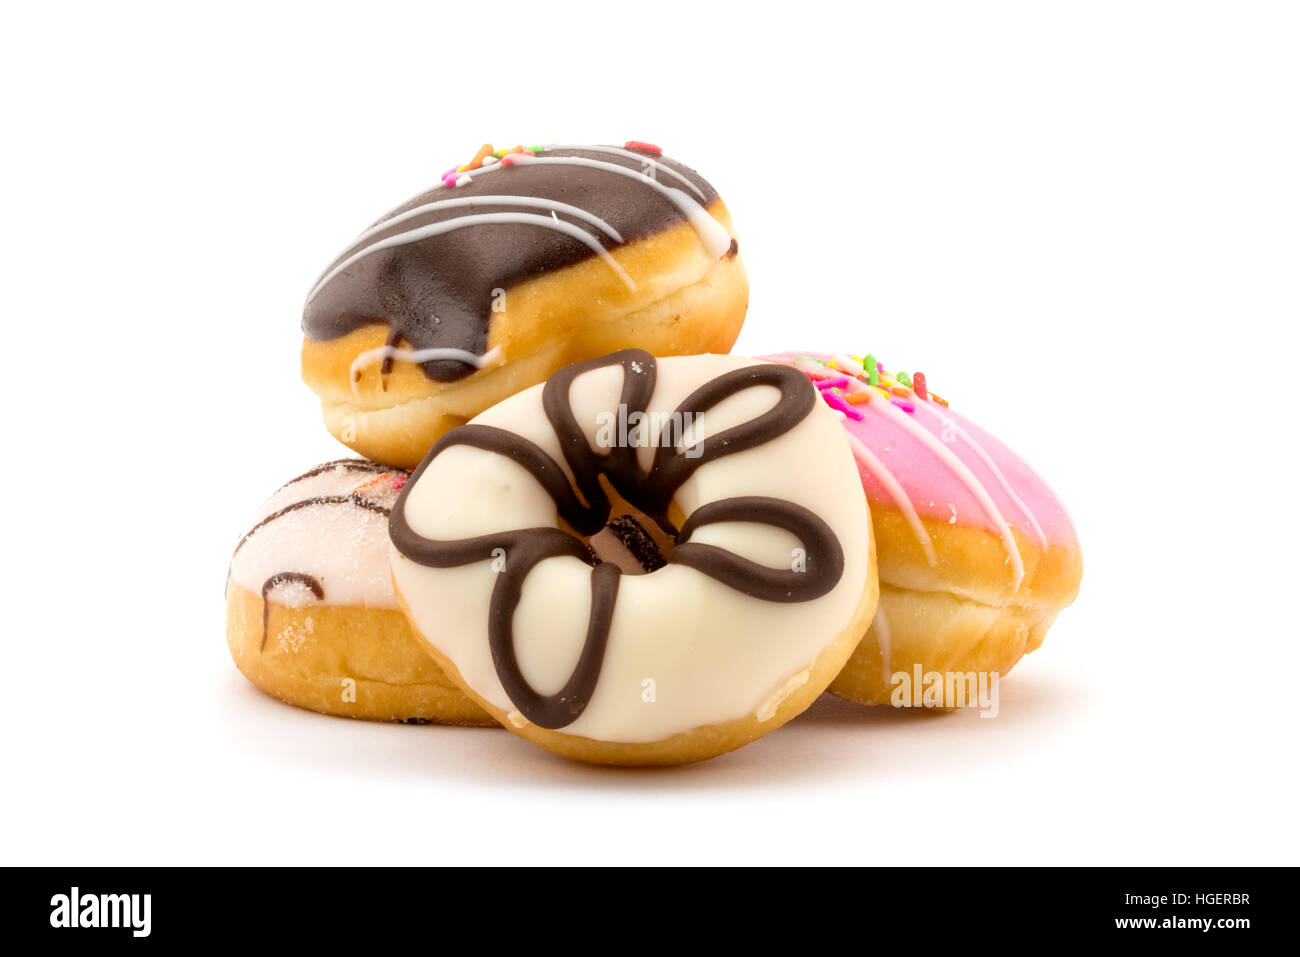 Pile of colorful doughnuts on white background Stock Photo